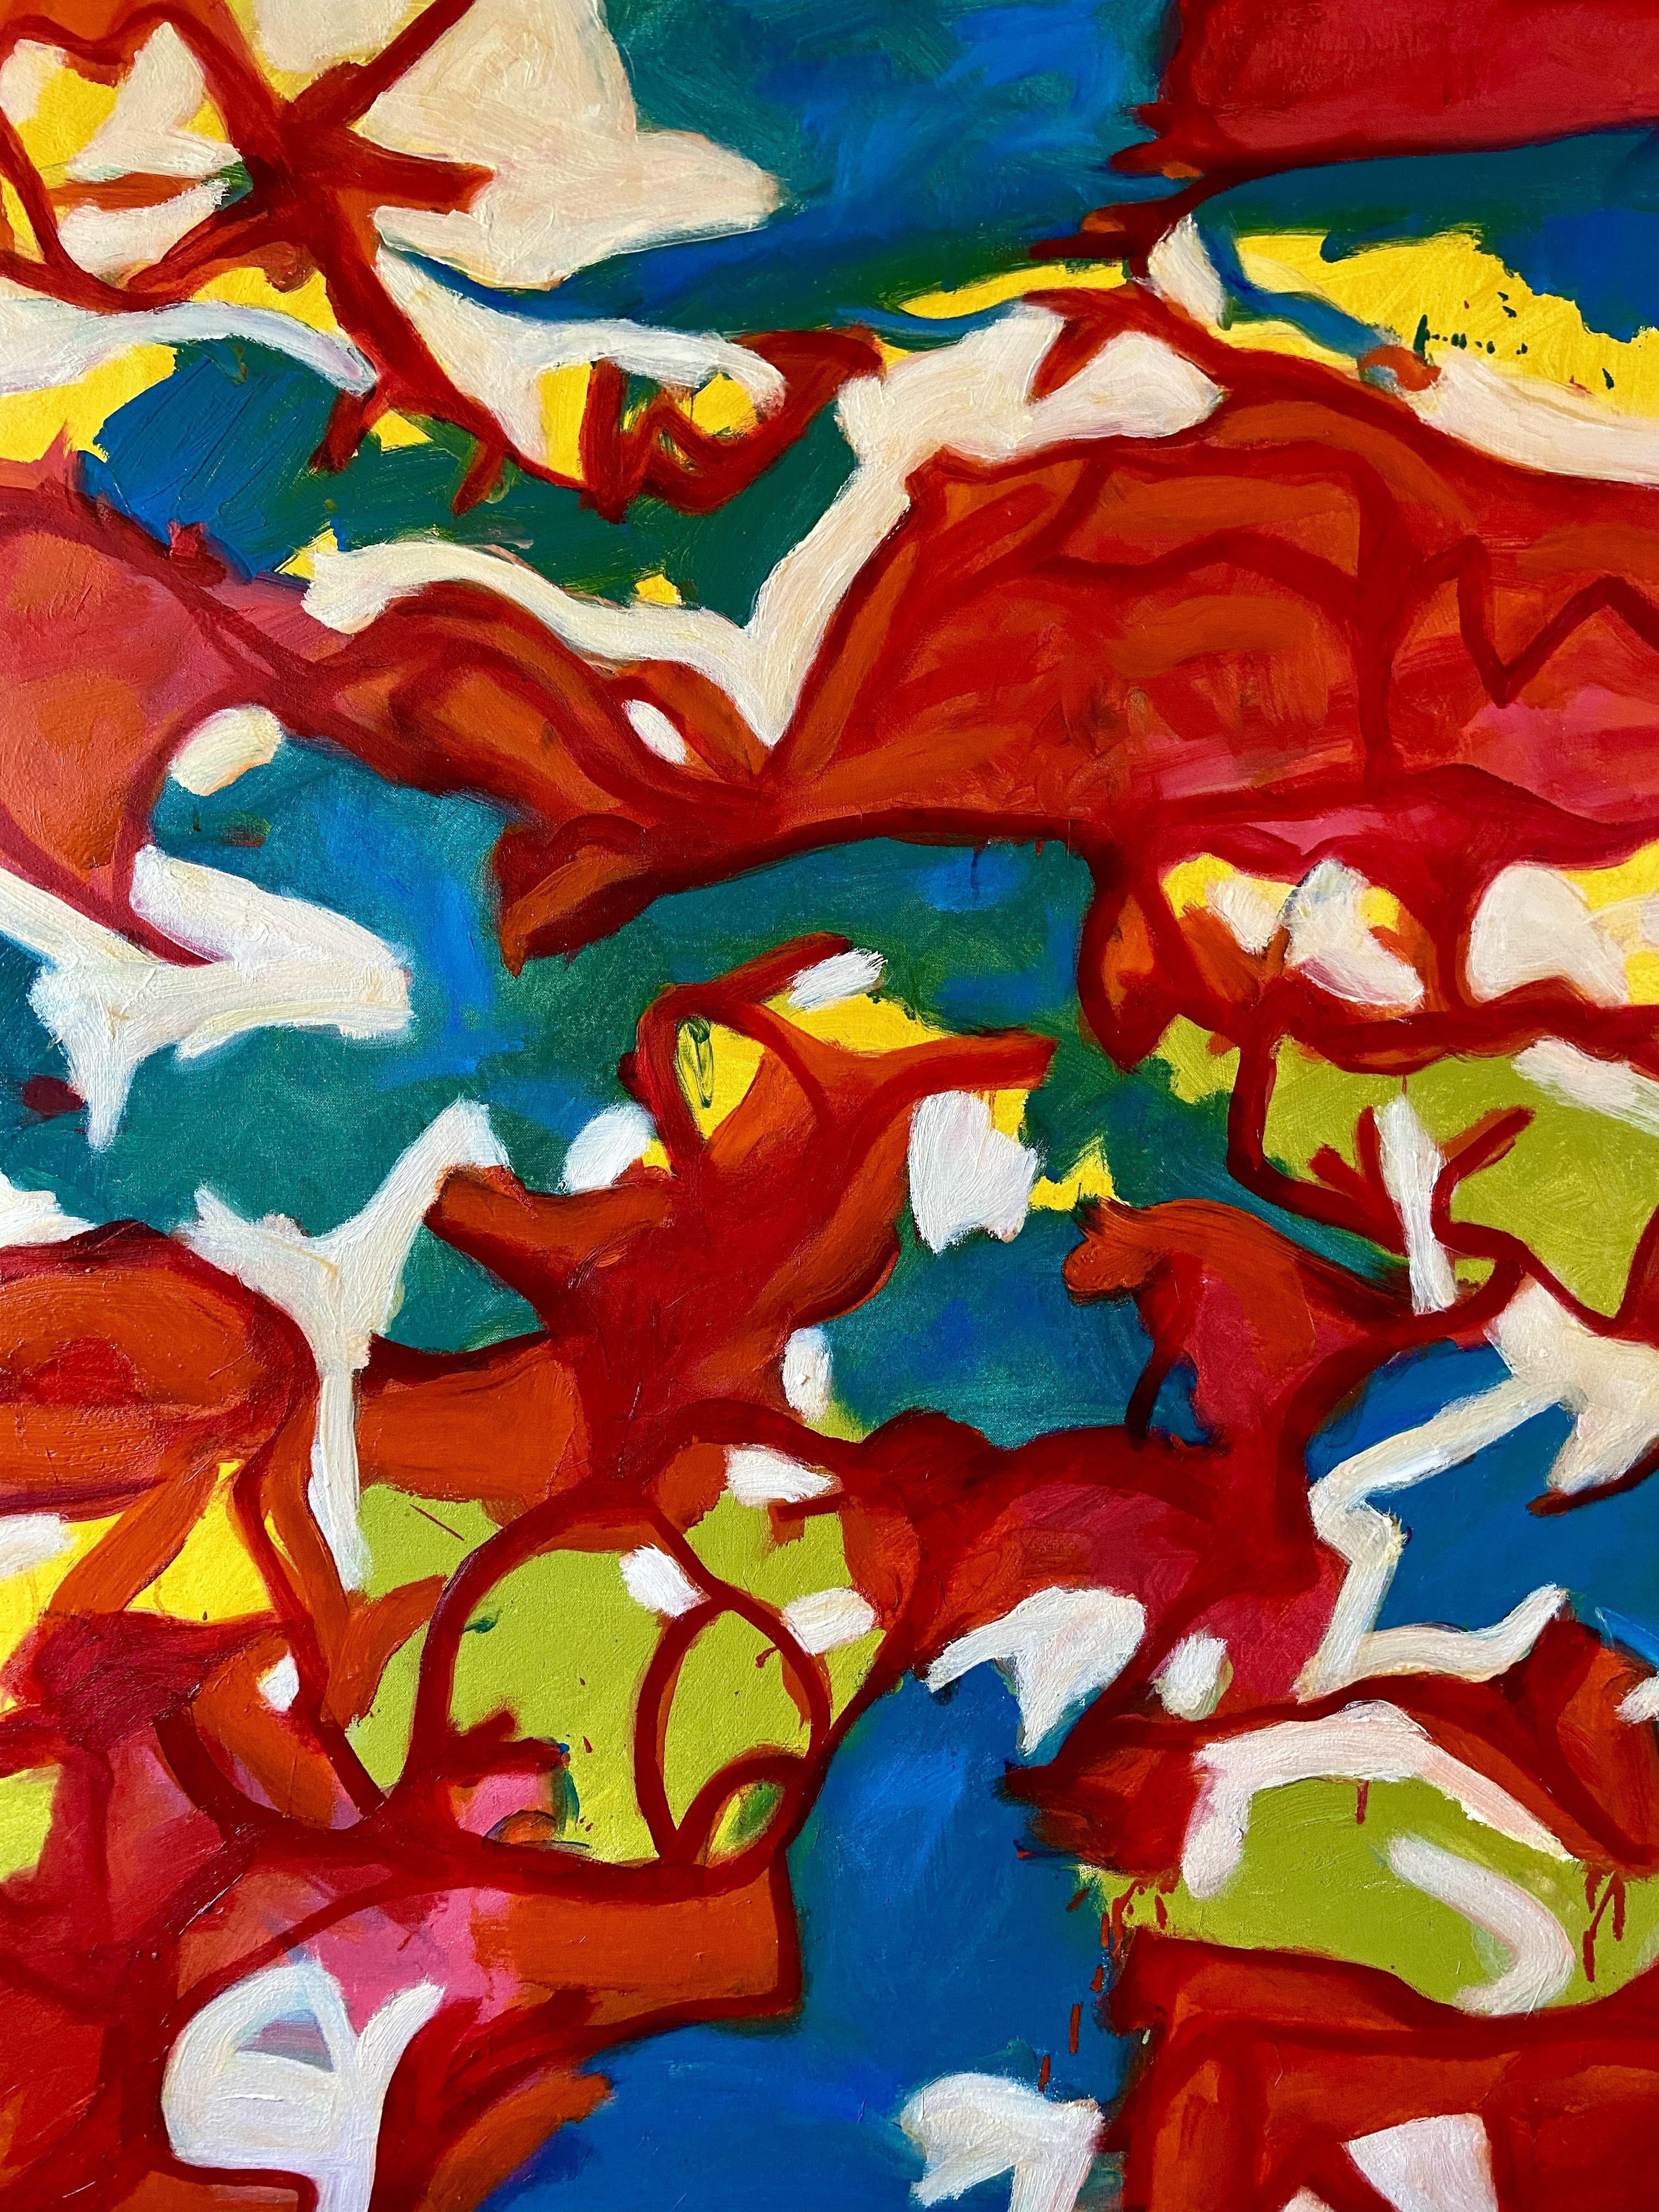 Oil on canvas inspire by nature, travels and other observations. My abstract paintings are all about creating excitement for the viewer through concentrated exploration. Each painting is inspired by nature, travels, or imagination and created to